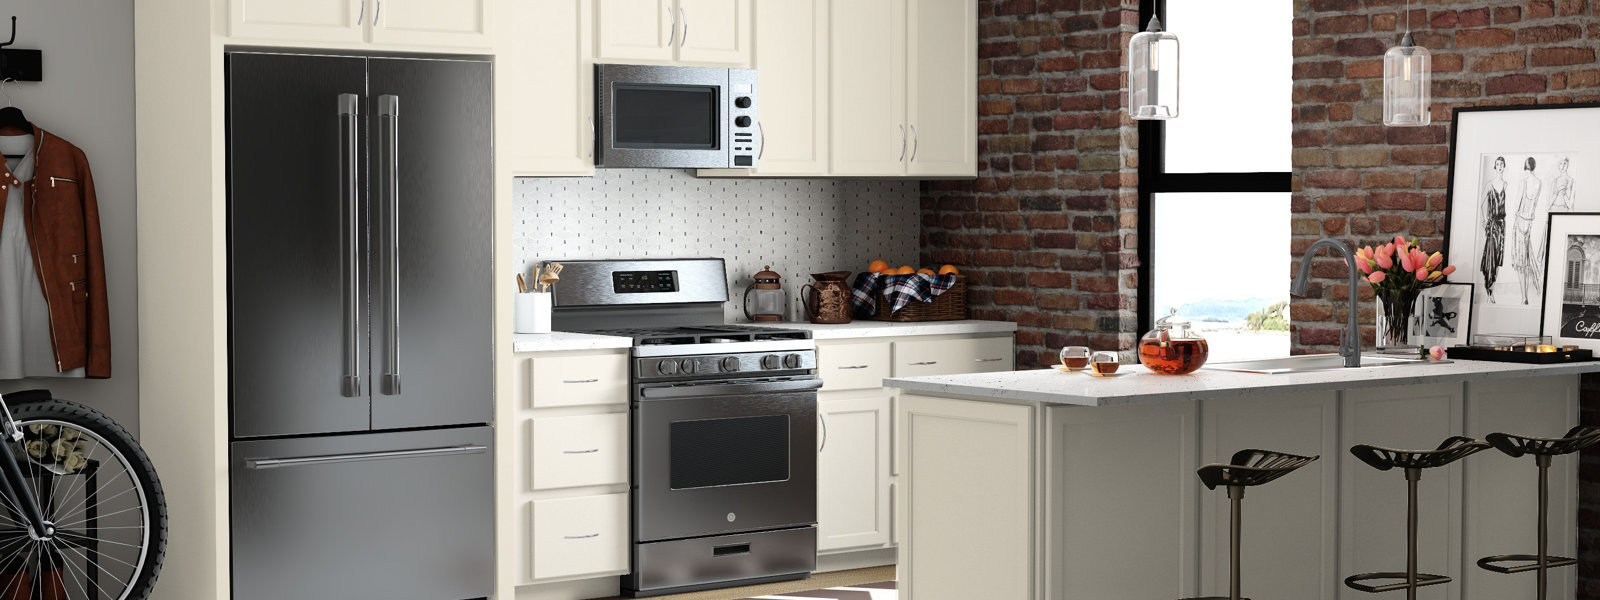 CREAM KITCHEN CABINETS, Cream kitchen cabinets with stainless steel  appliances. Design by